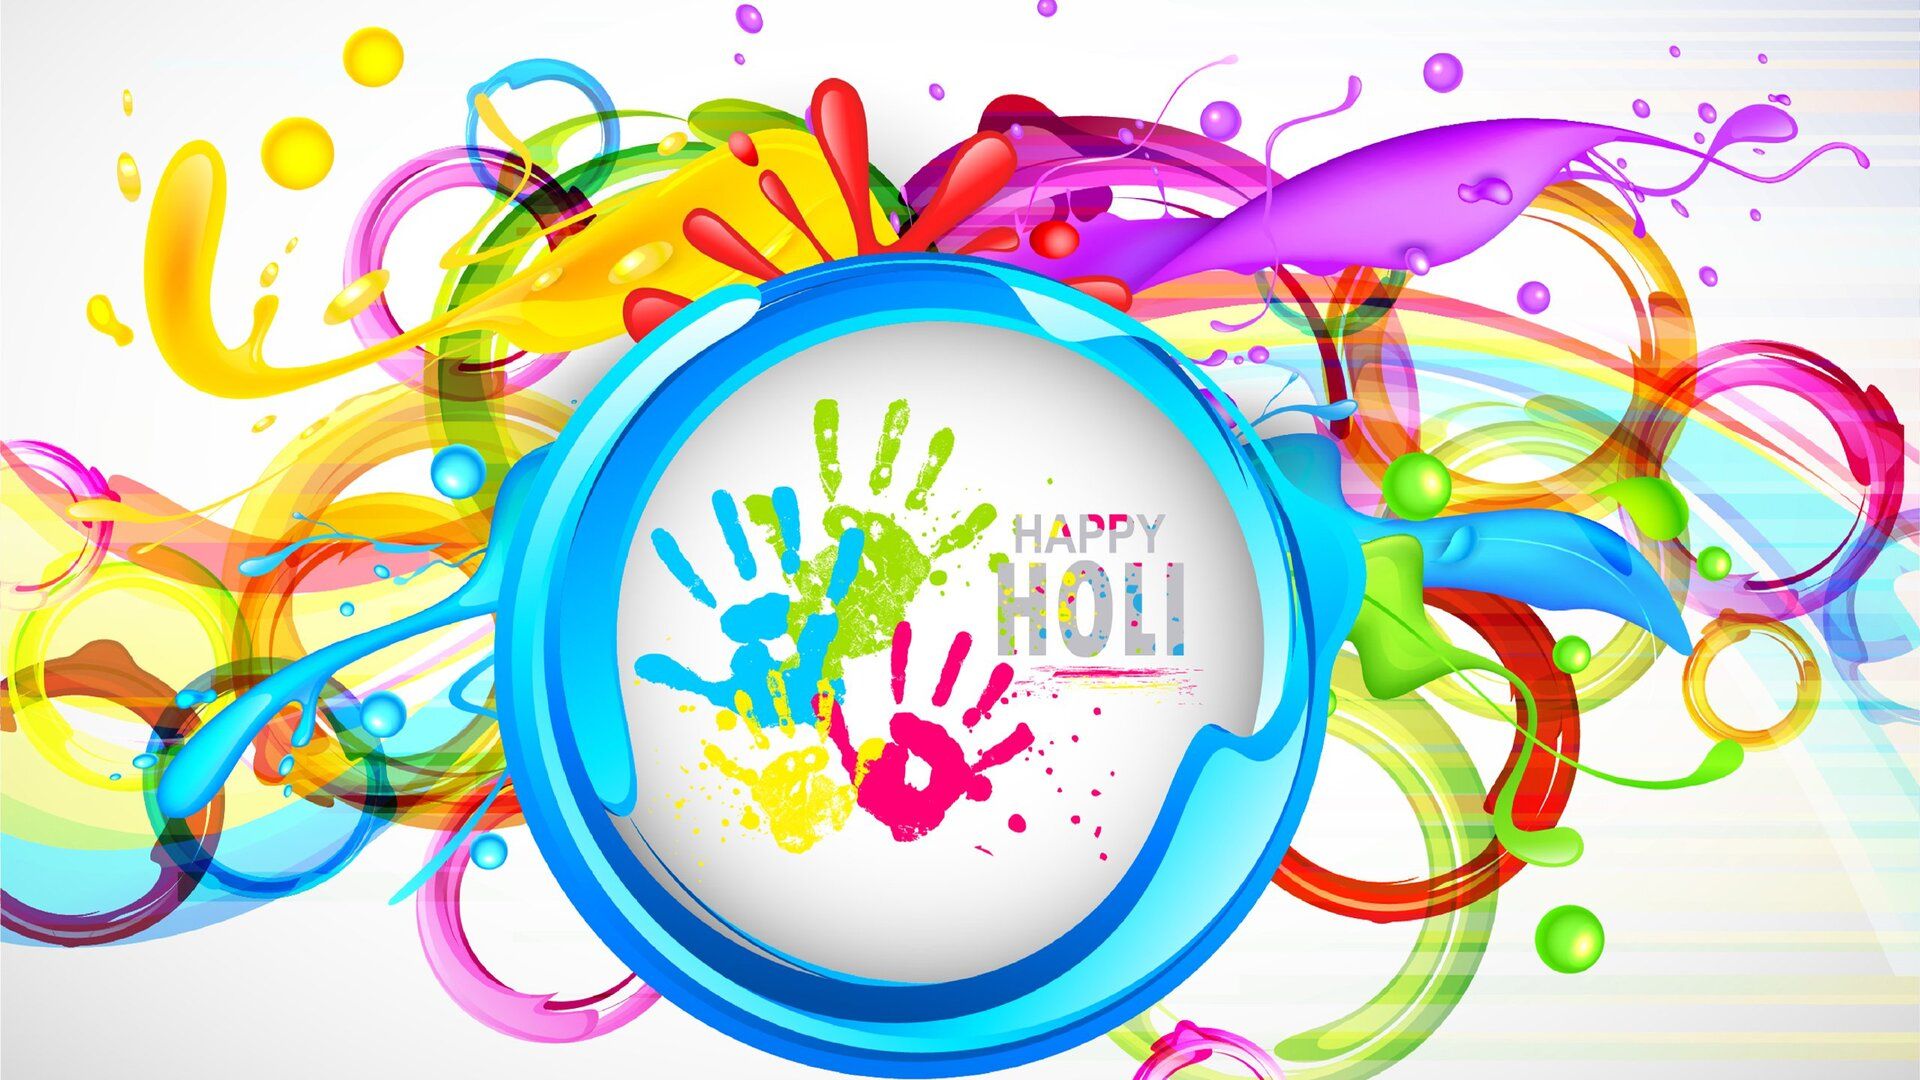 Happy Holi Image Laptop Full HD 1080P HD 4k Wallpaper, Image, Background, Photo and Picture